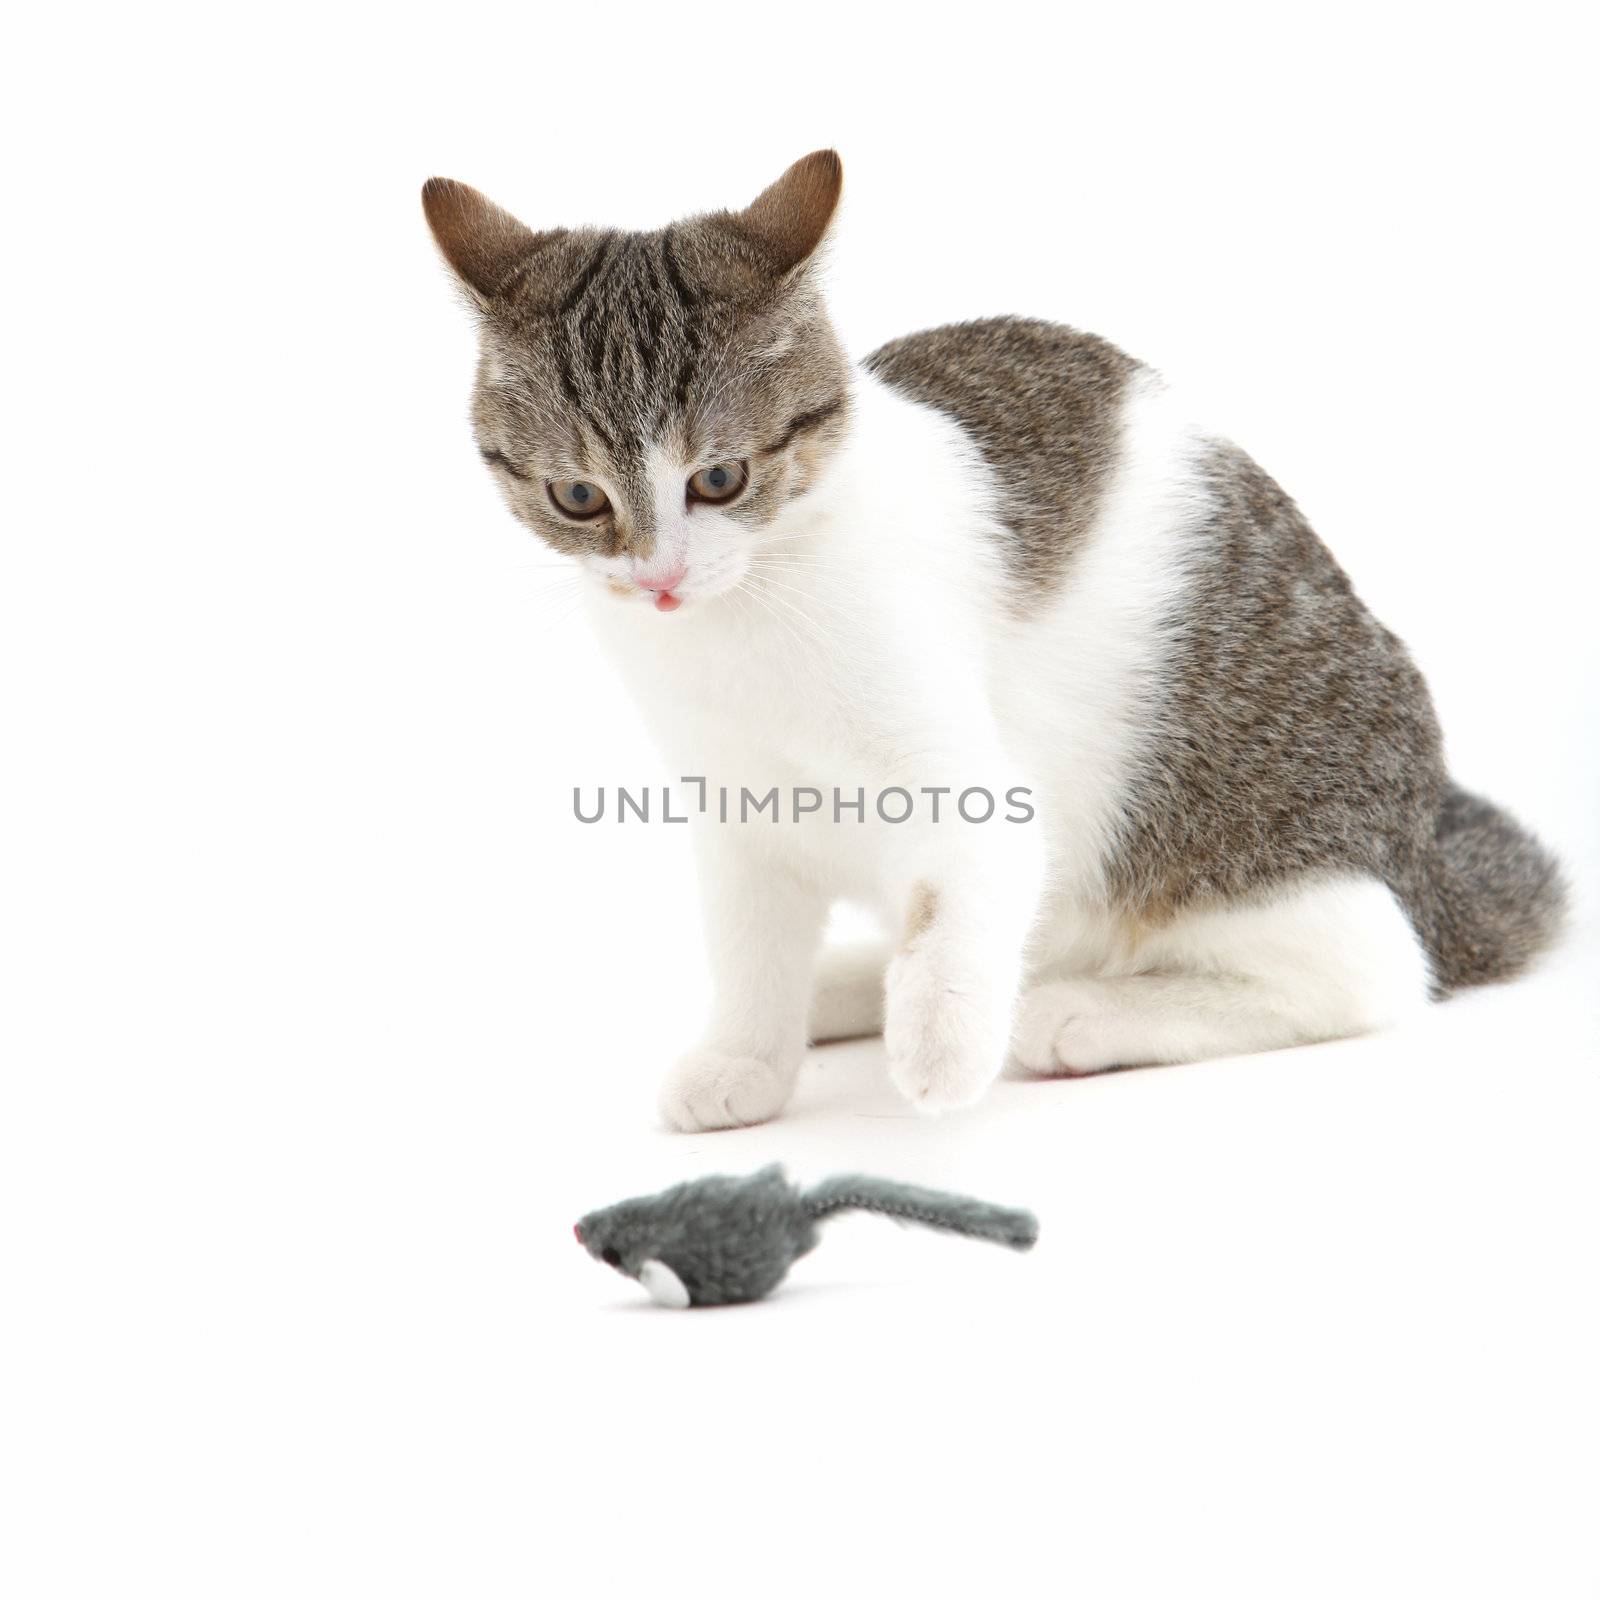 Fun image of animal behaviour with a cat watching a toy mouse that is lying on its back in anticipation that it will jump up and try to escape isolated on white